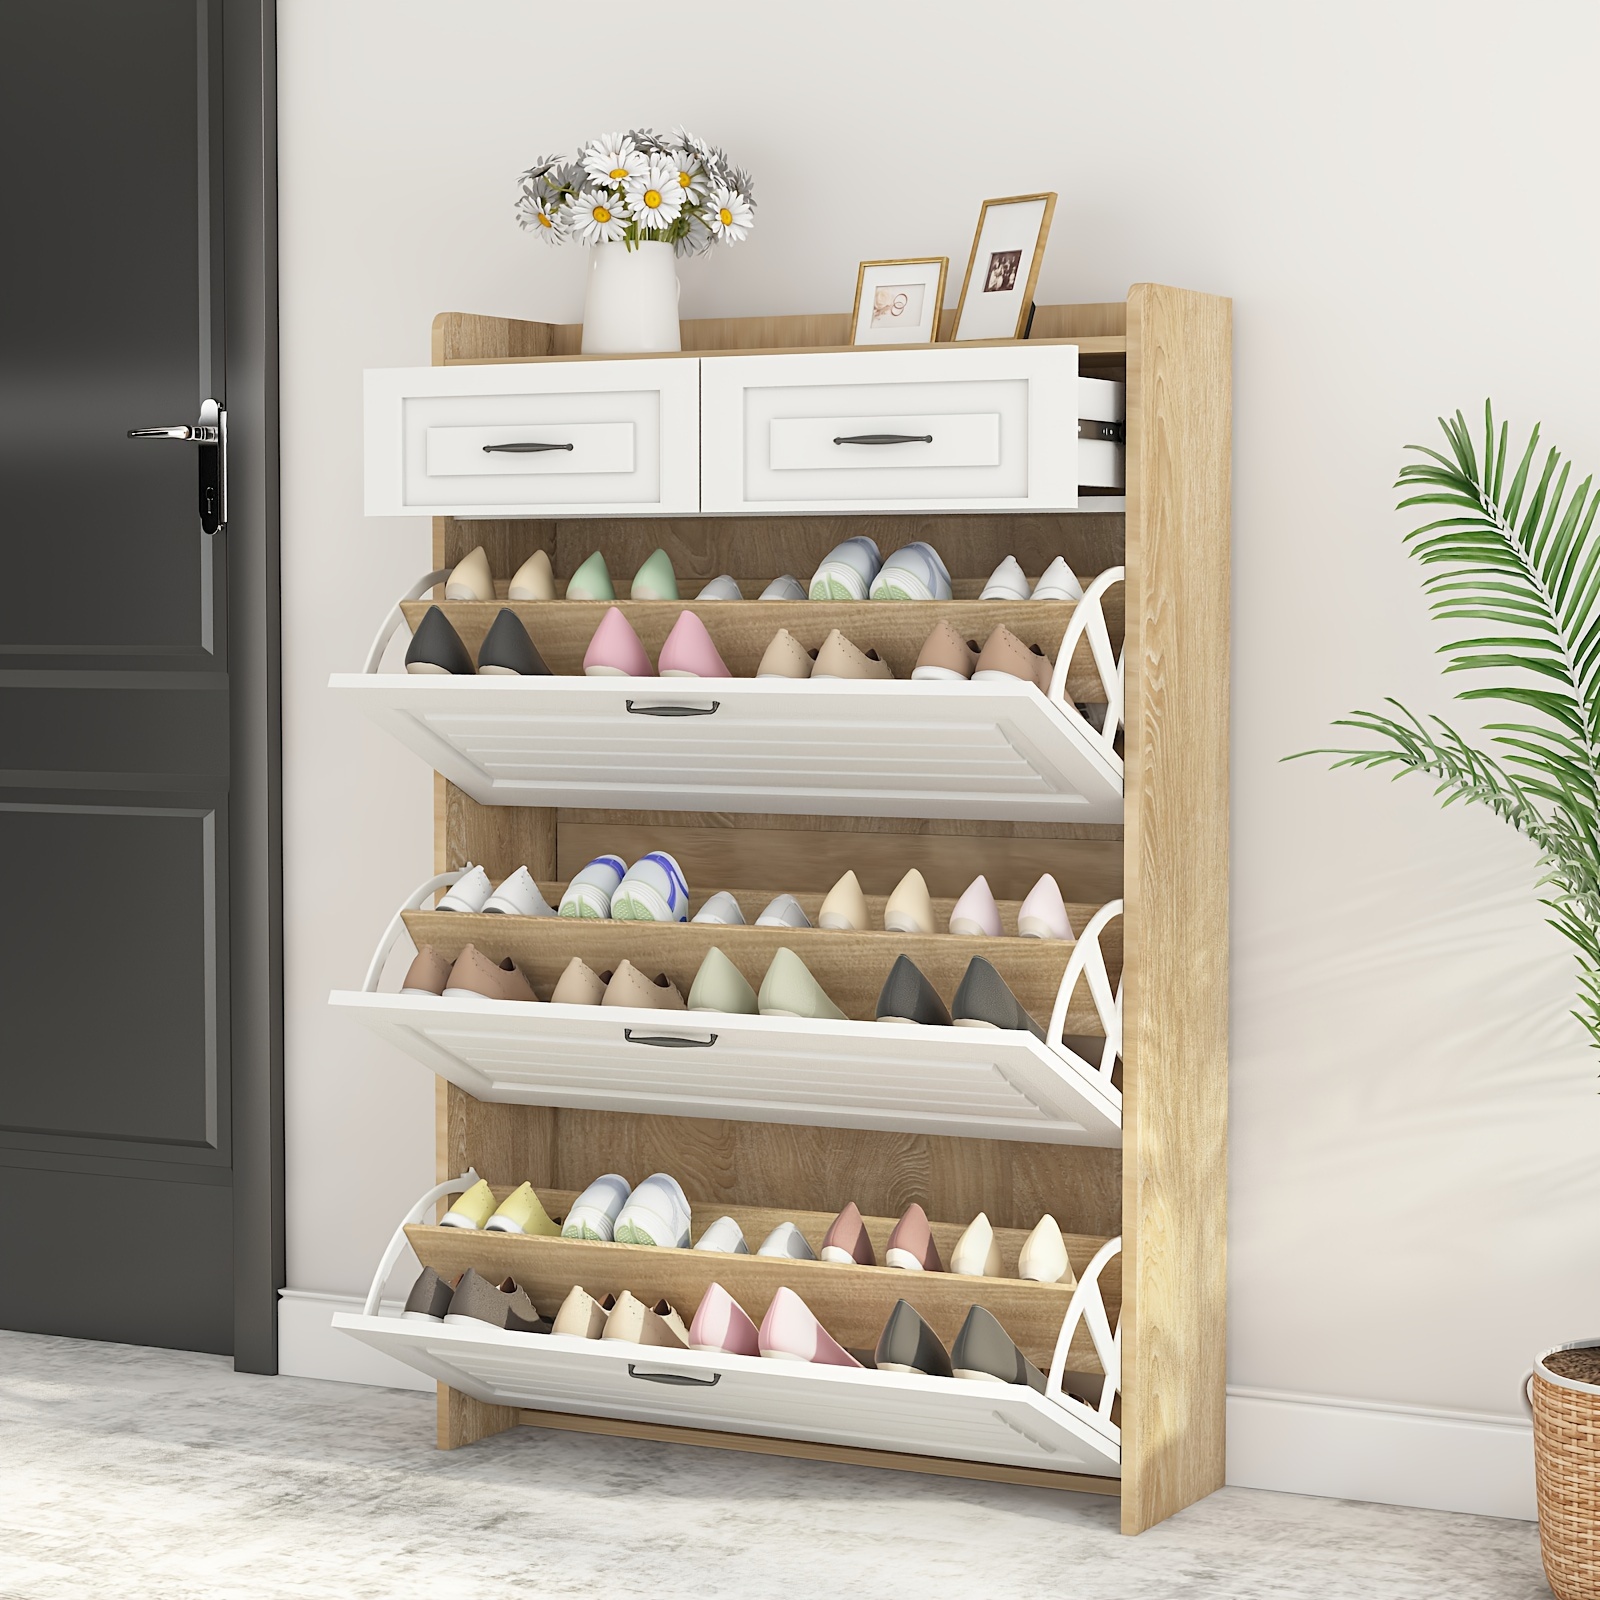 

1pc White +oak Color Shoe Cabinet With 3 Doors 2 Drawers, Pvc Door With Shape, Large Space For Storage